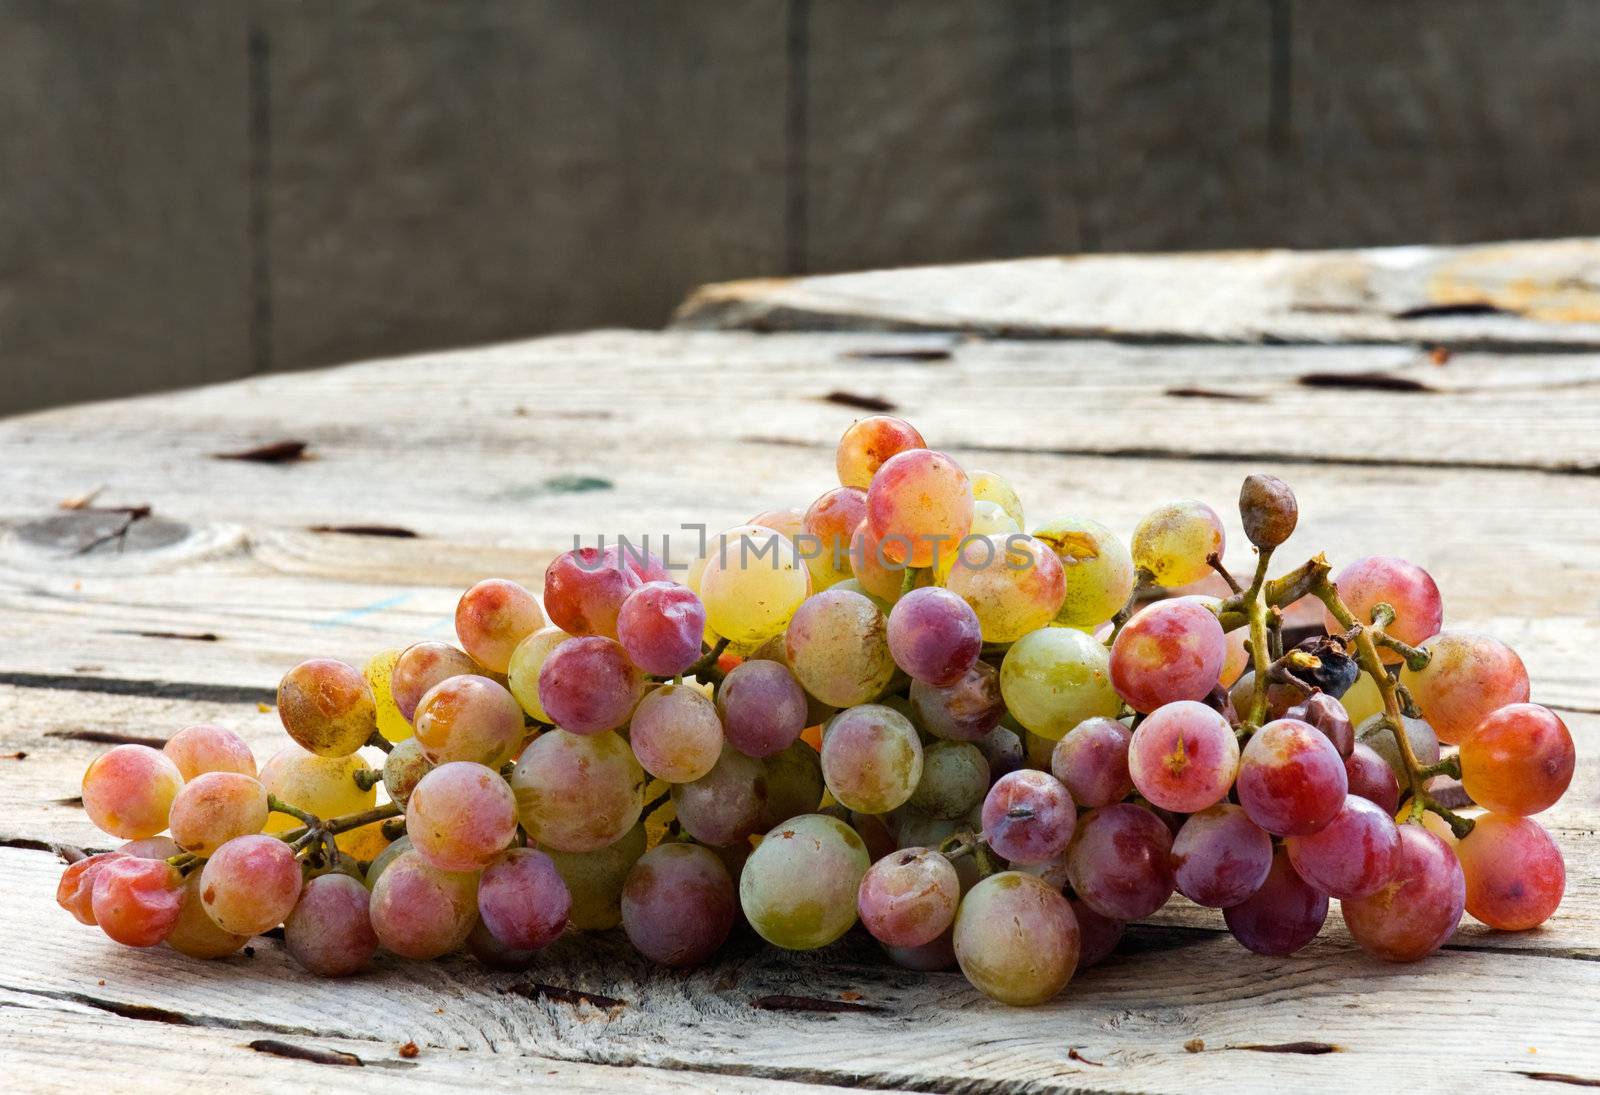 Image shows a bunch of grapes on a wooden table